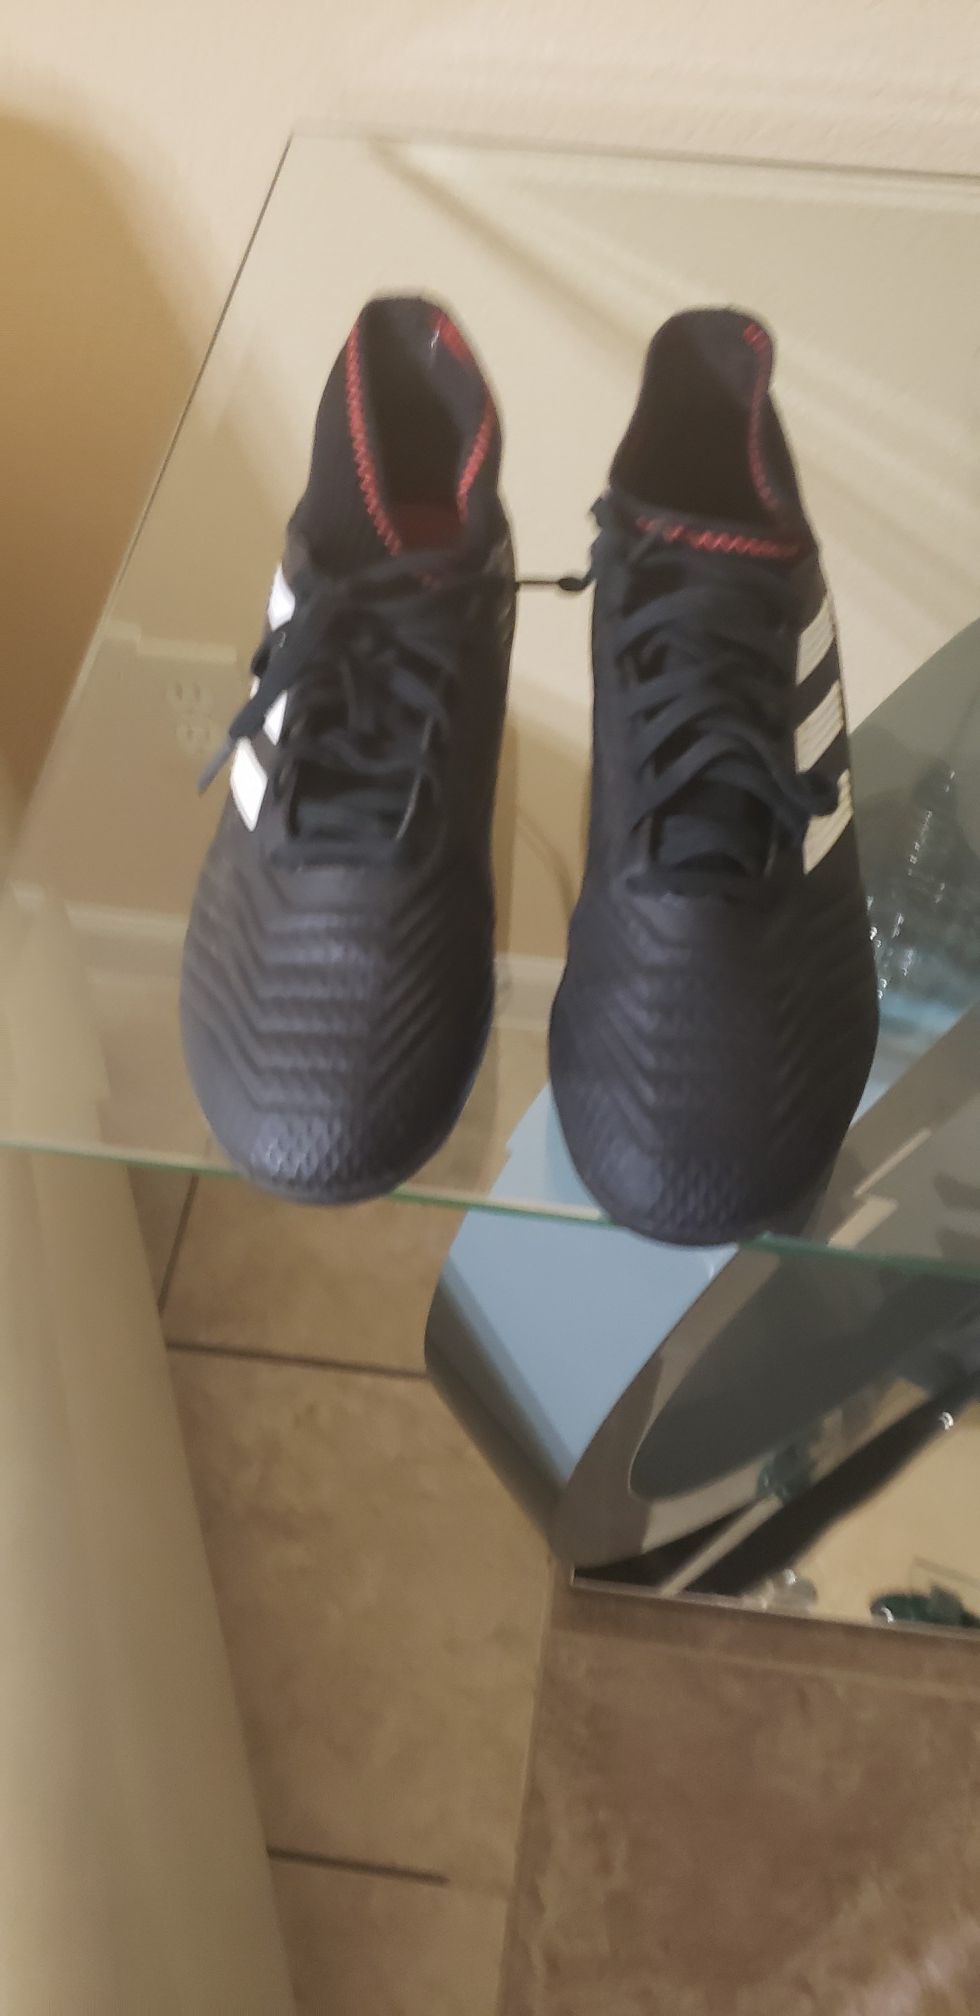 Soccer shoes(adidas)